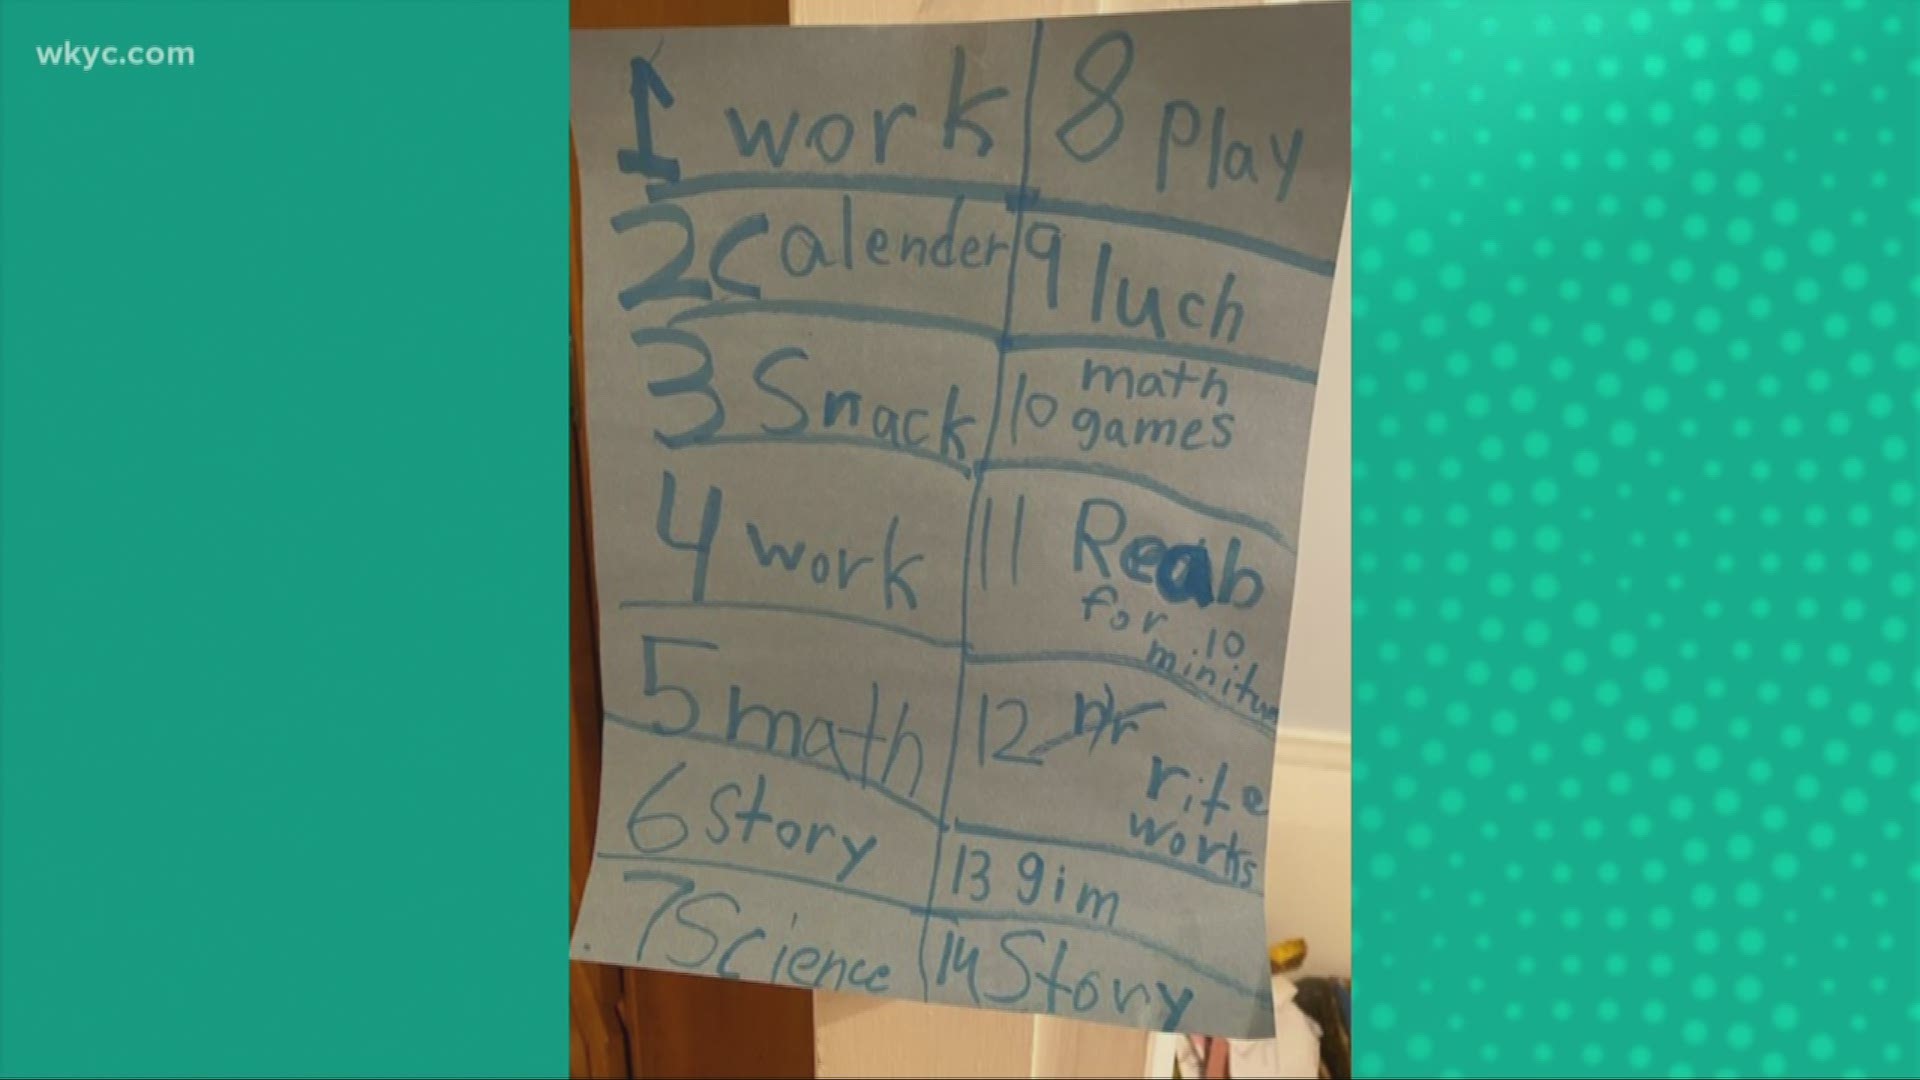 March 17, 2020: This is one of the cutest things we've seen today. 3News' Lindsay Buckingham shared an adorable photo of the 'class' schedule her daughter created.